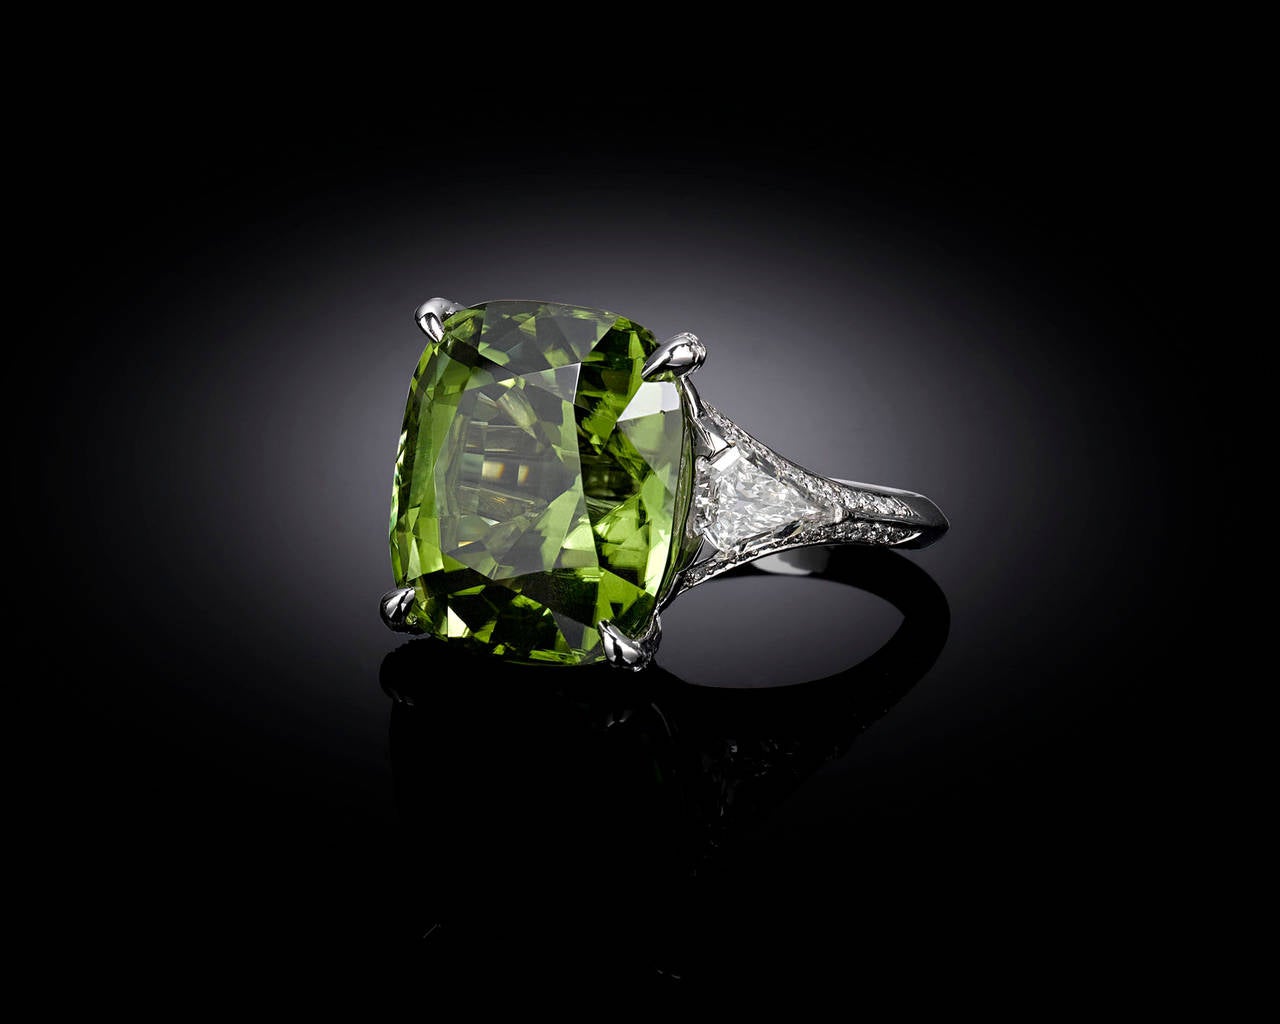 A mesmerizing 20.30-carat Burma peridot commands attention in this exquisite cocktail ring. Displaying the fresh, grass green hue for which peridots are so adored, this gem exhibits an uncanny clarity. Large peridots such as this tend to contain